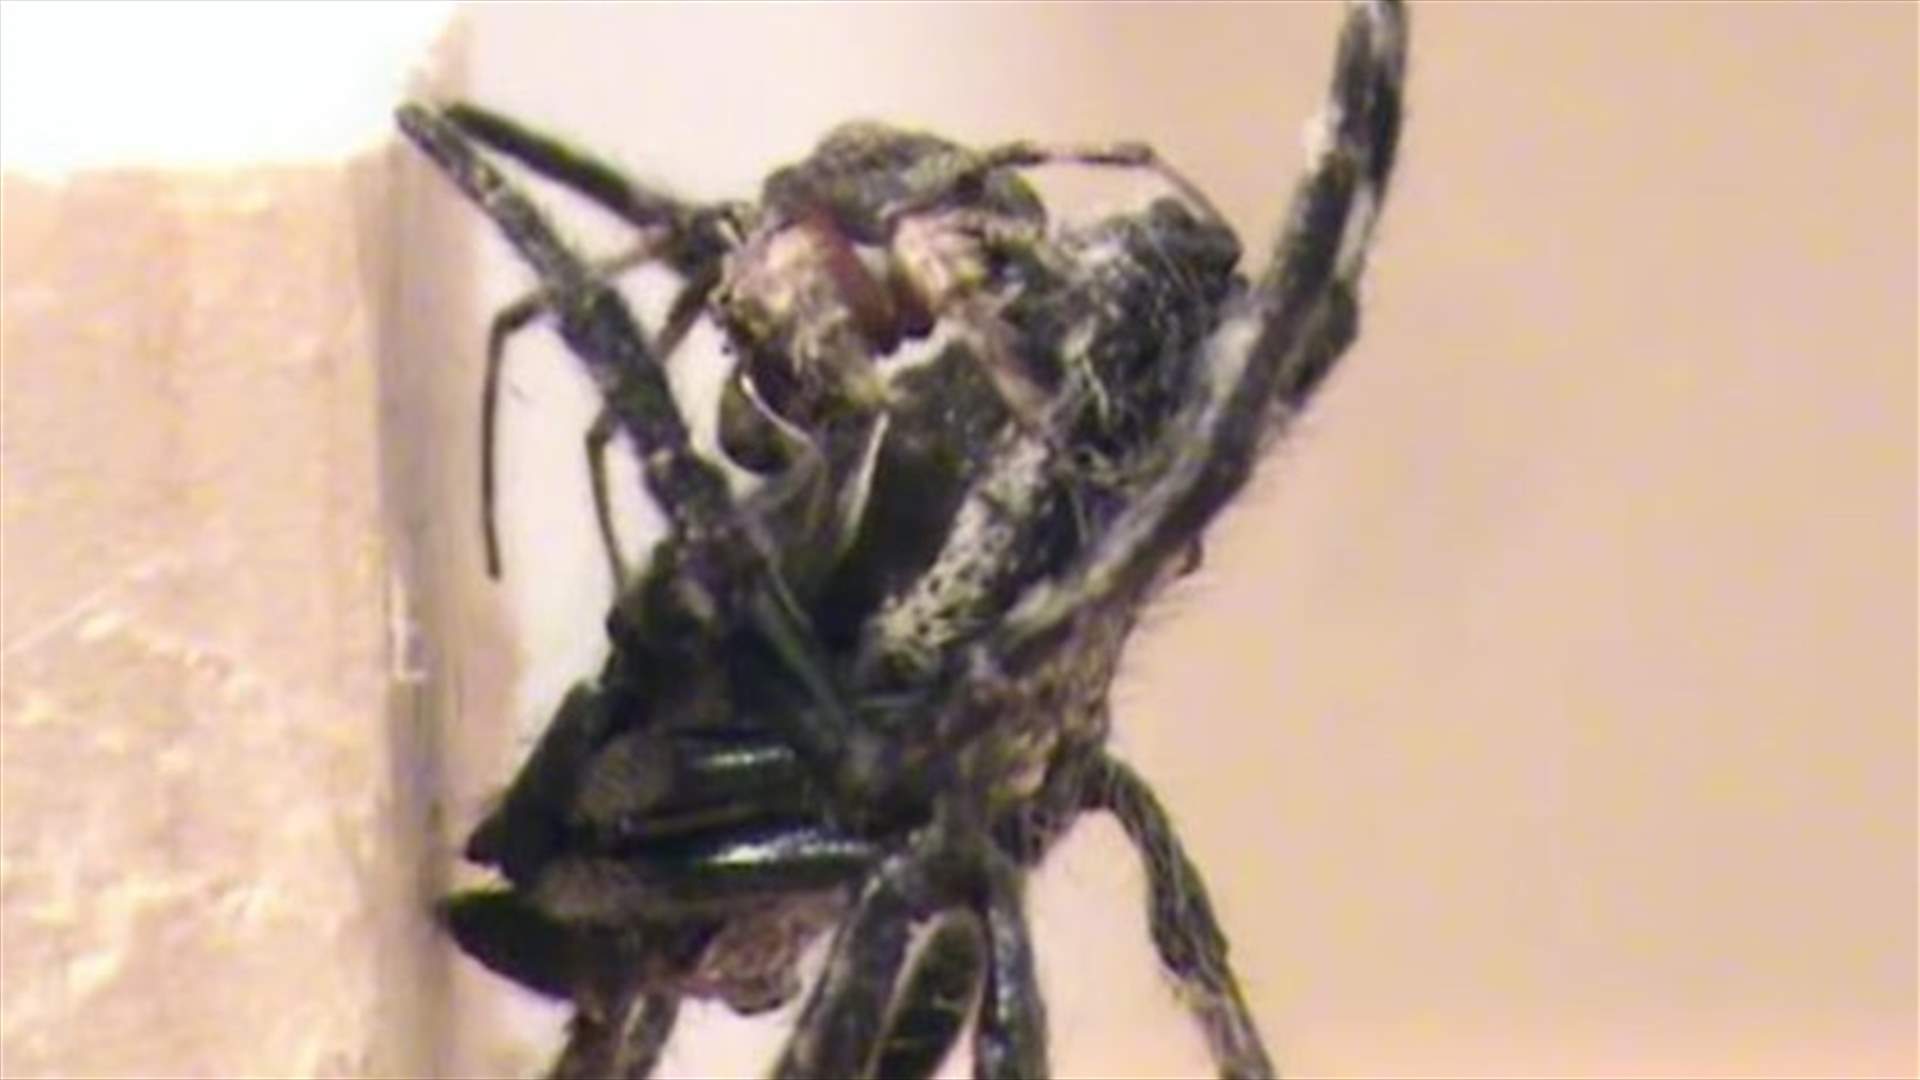 Giant Female Spiders Force Males To Perform Oral Sex-Scientists 